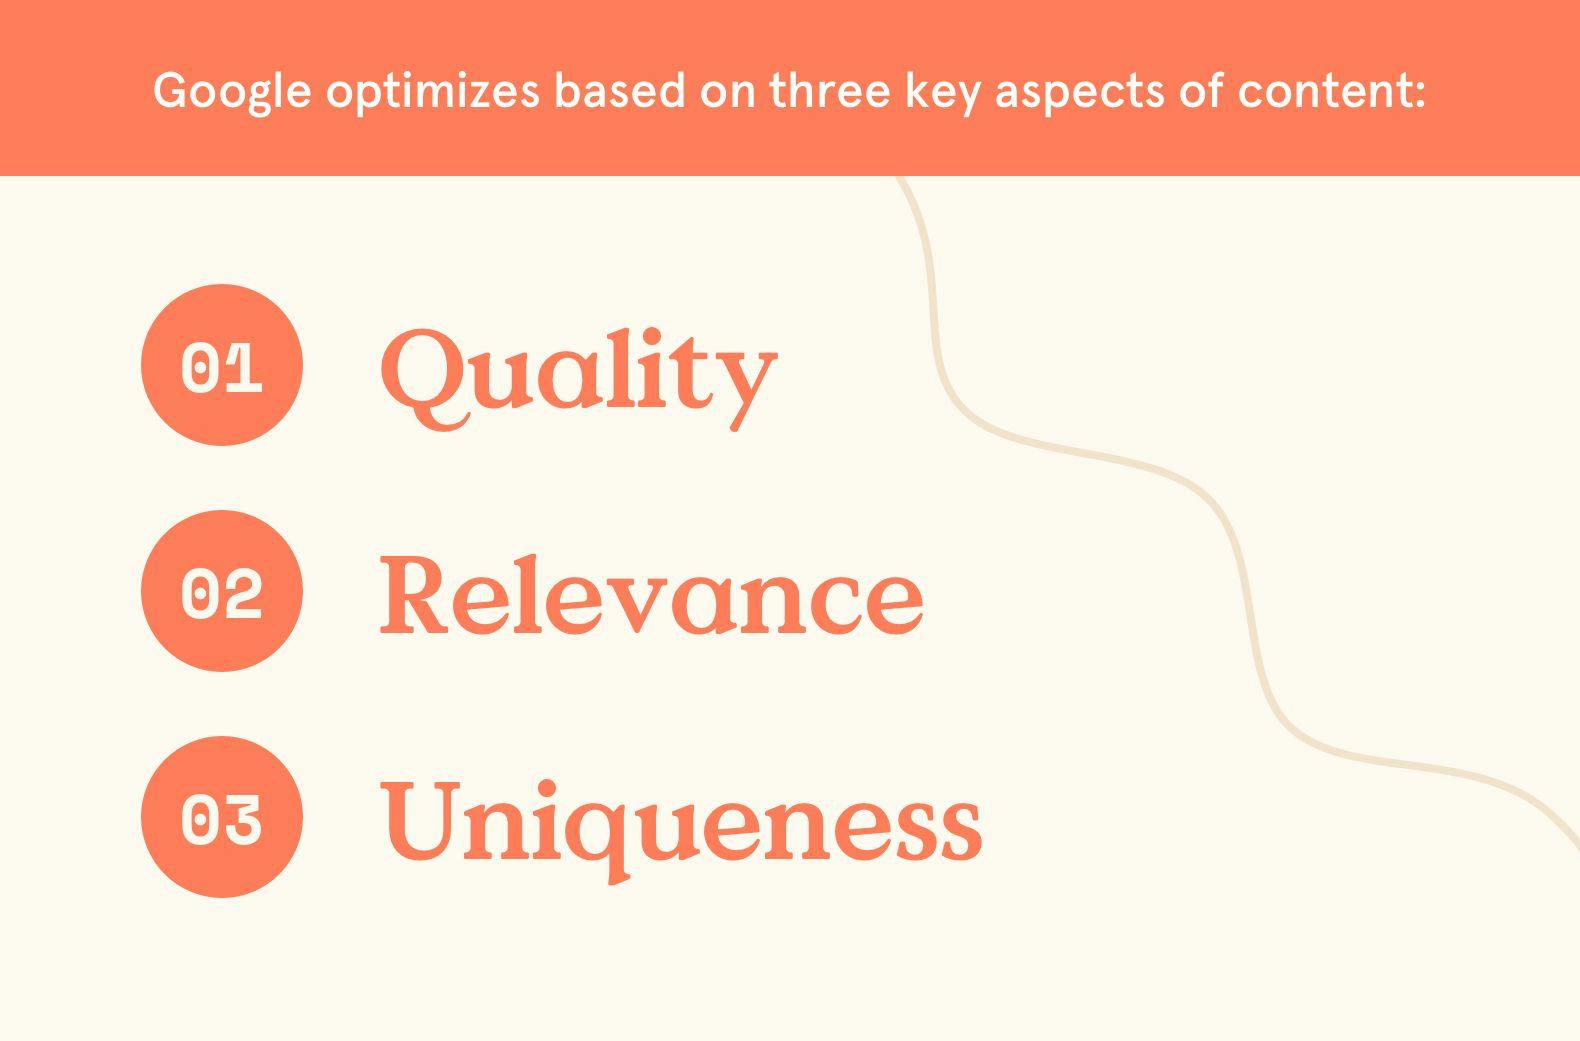 Google optimizes based on quality, relevance, and uniqueness